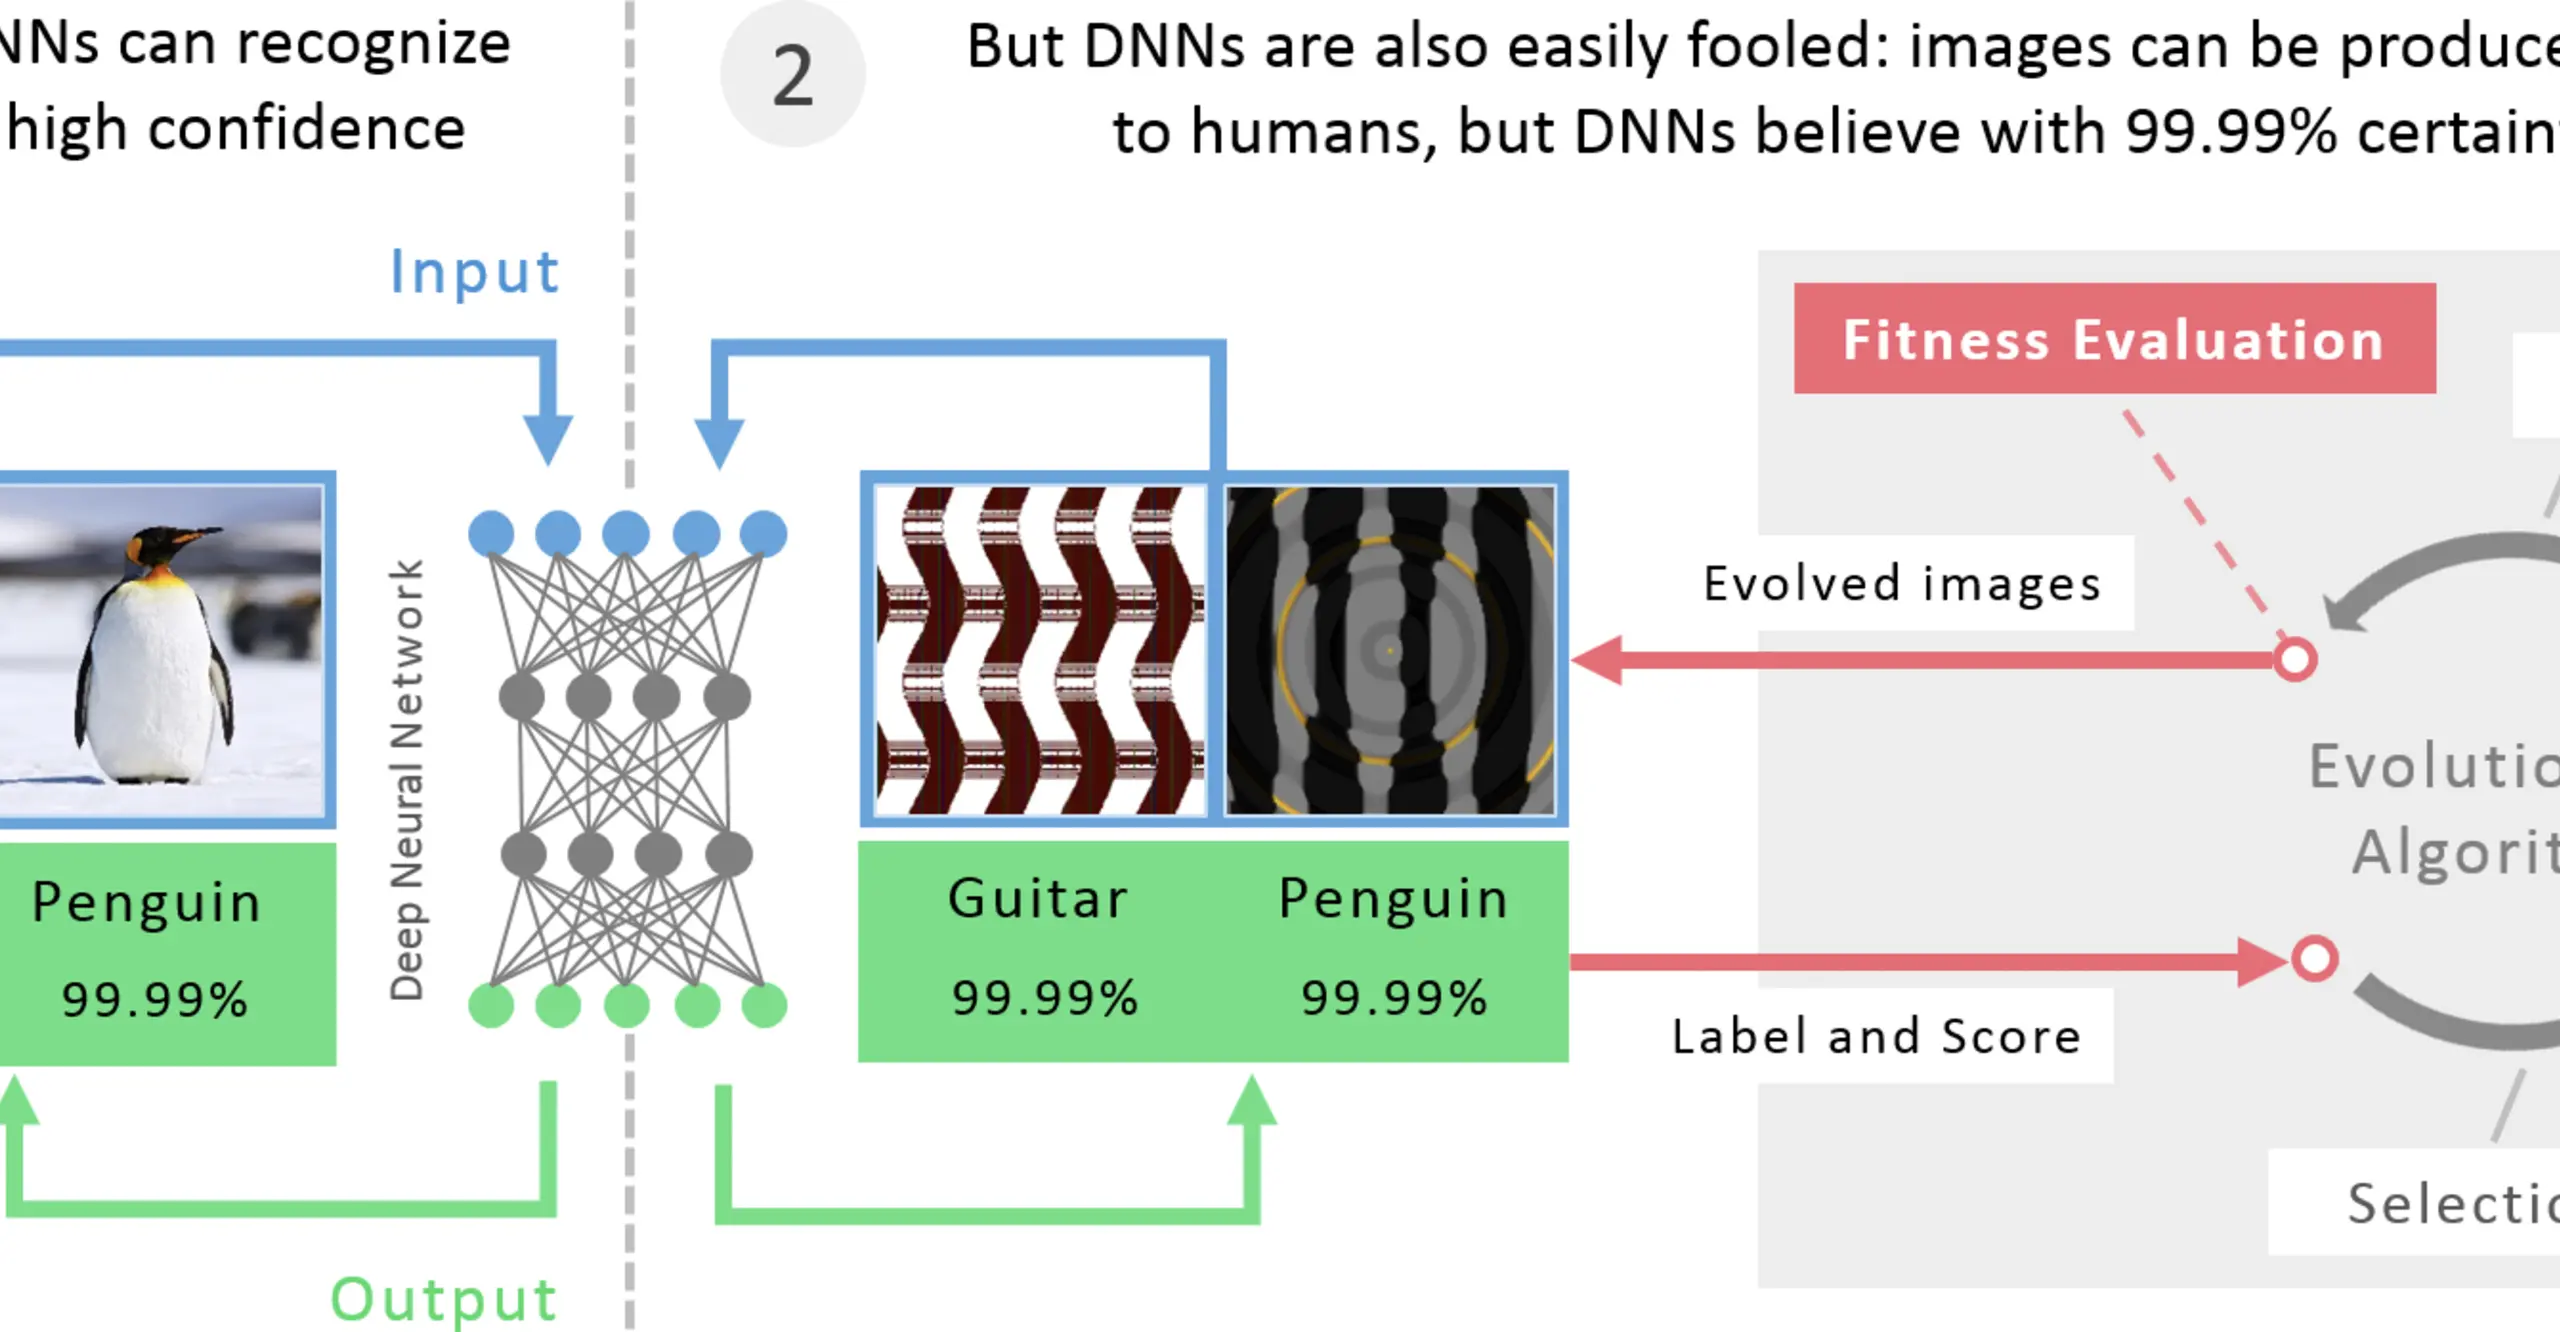 Illustration from: Deep Neural Networks are Easily Fooled: High Confidence Predictions for Unrecognizable Images. Paper by Anh Nguyen, Jason Yosinski and Jeff Clune, 2015